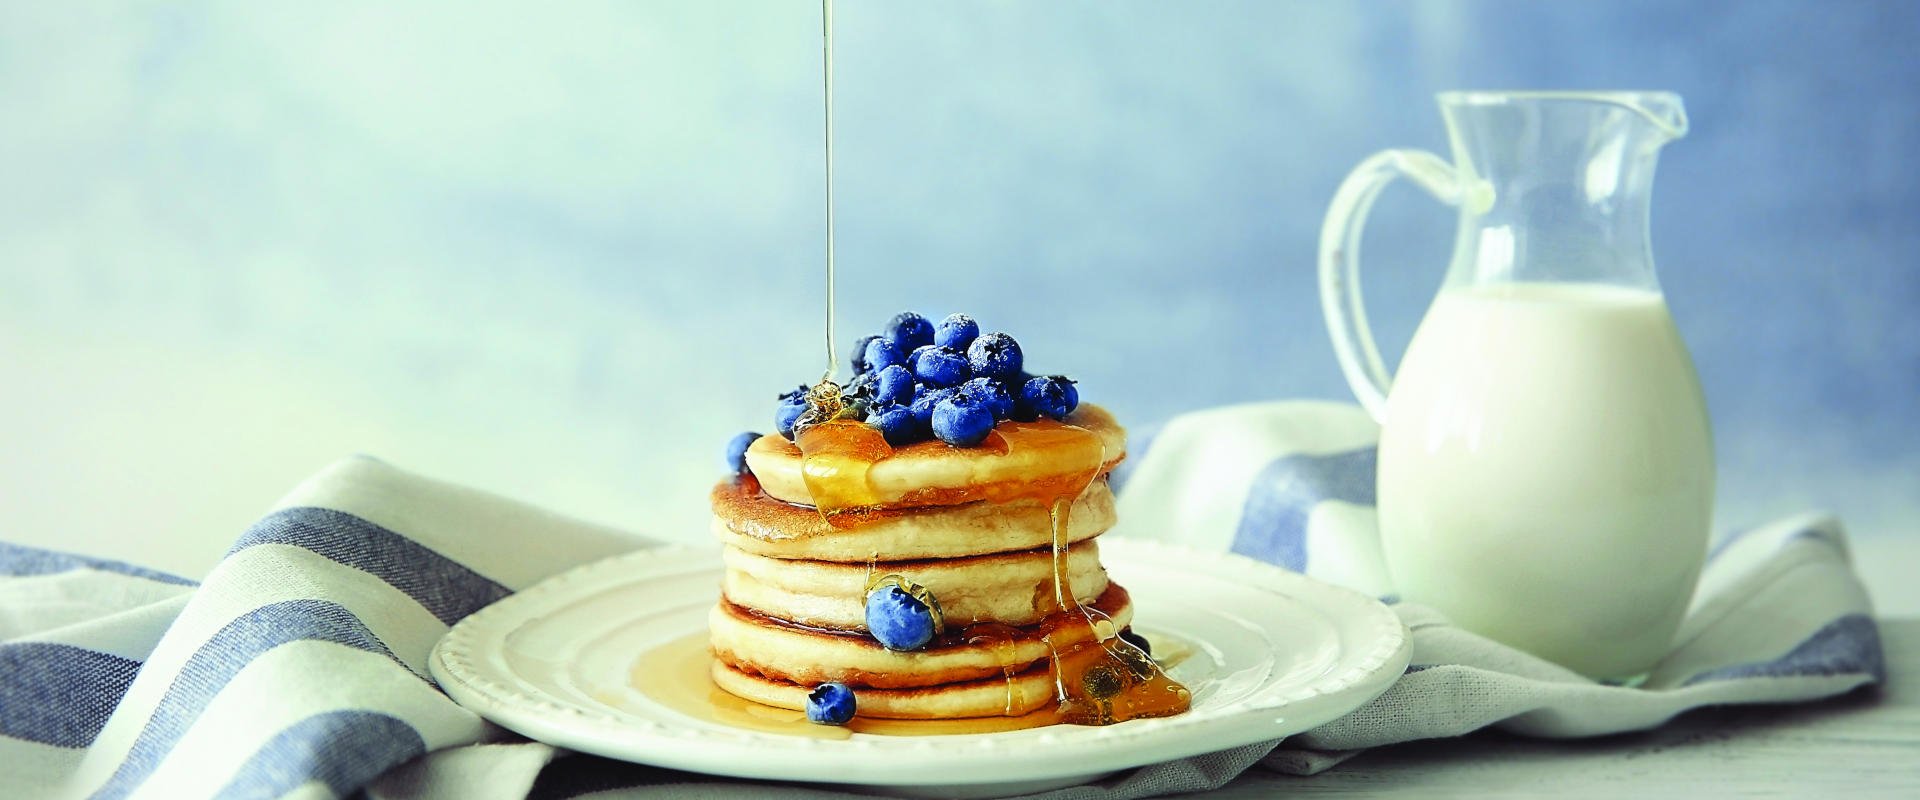 pancake with blueberries and honey